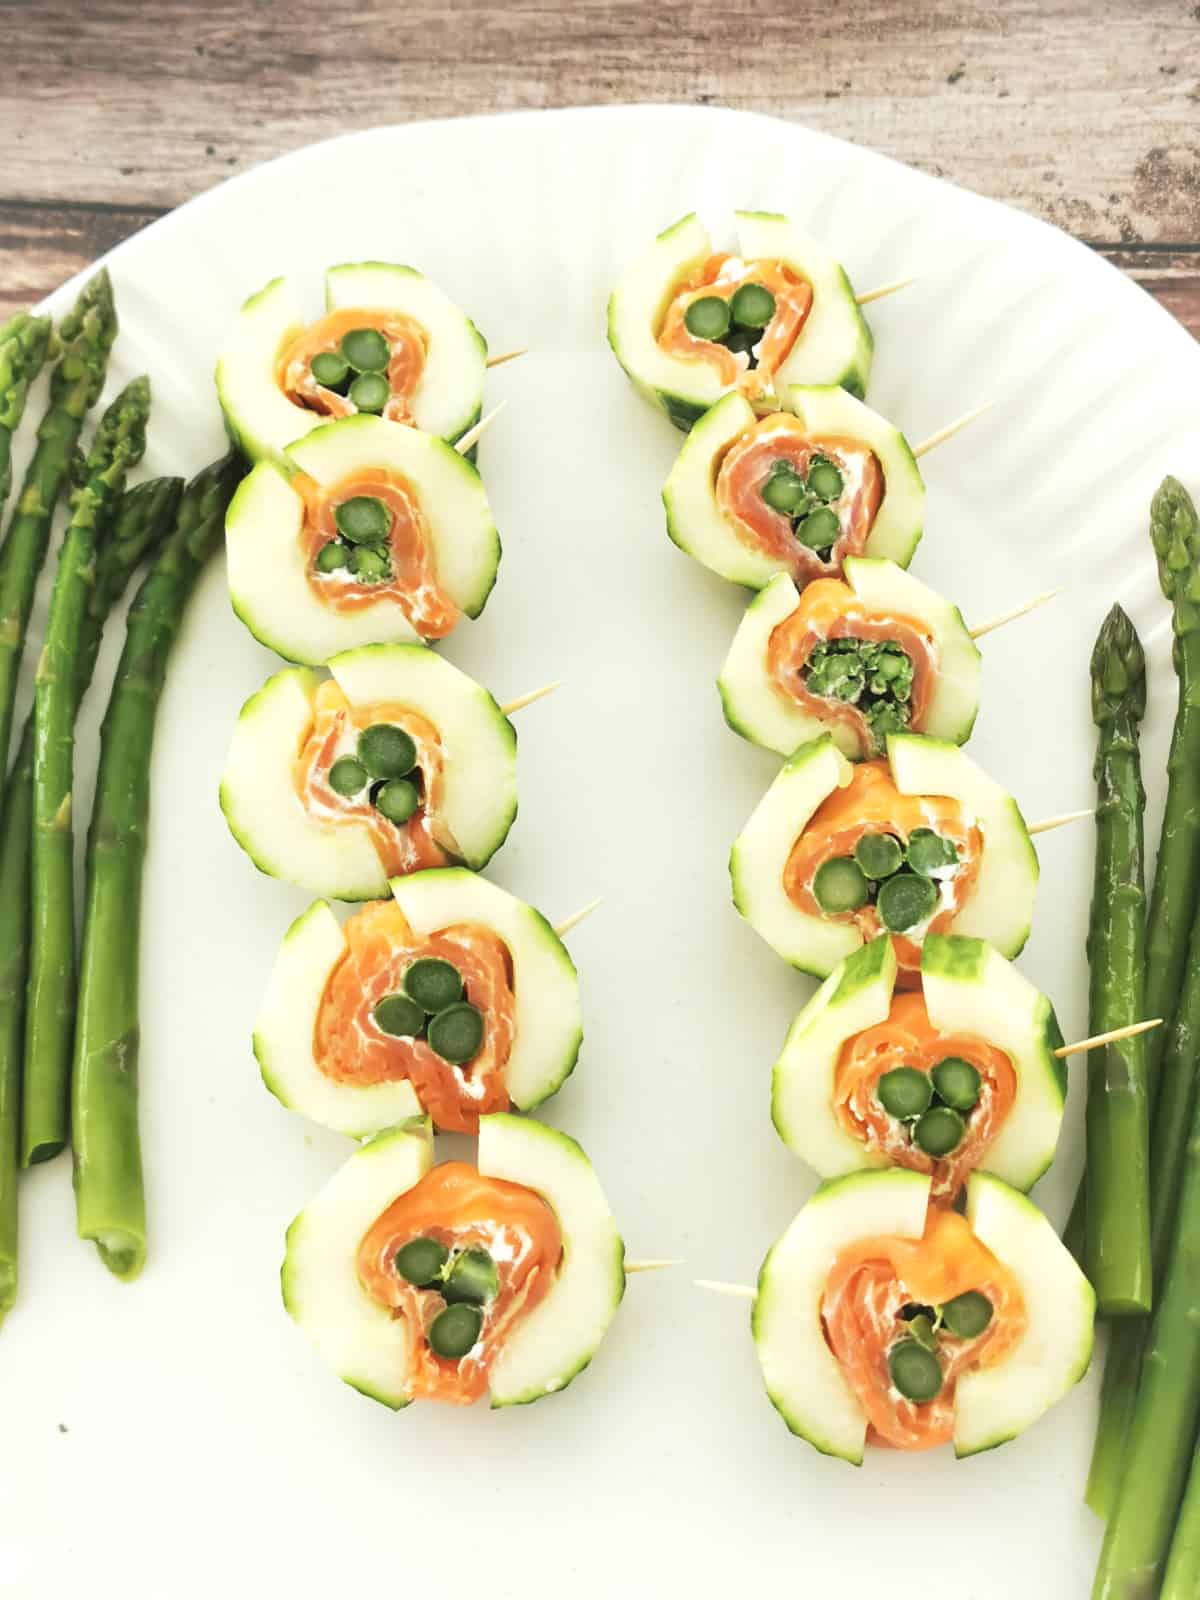 Asparagus in smoked salmon and cucumber appetizer on white serving platter